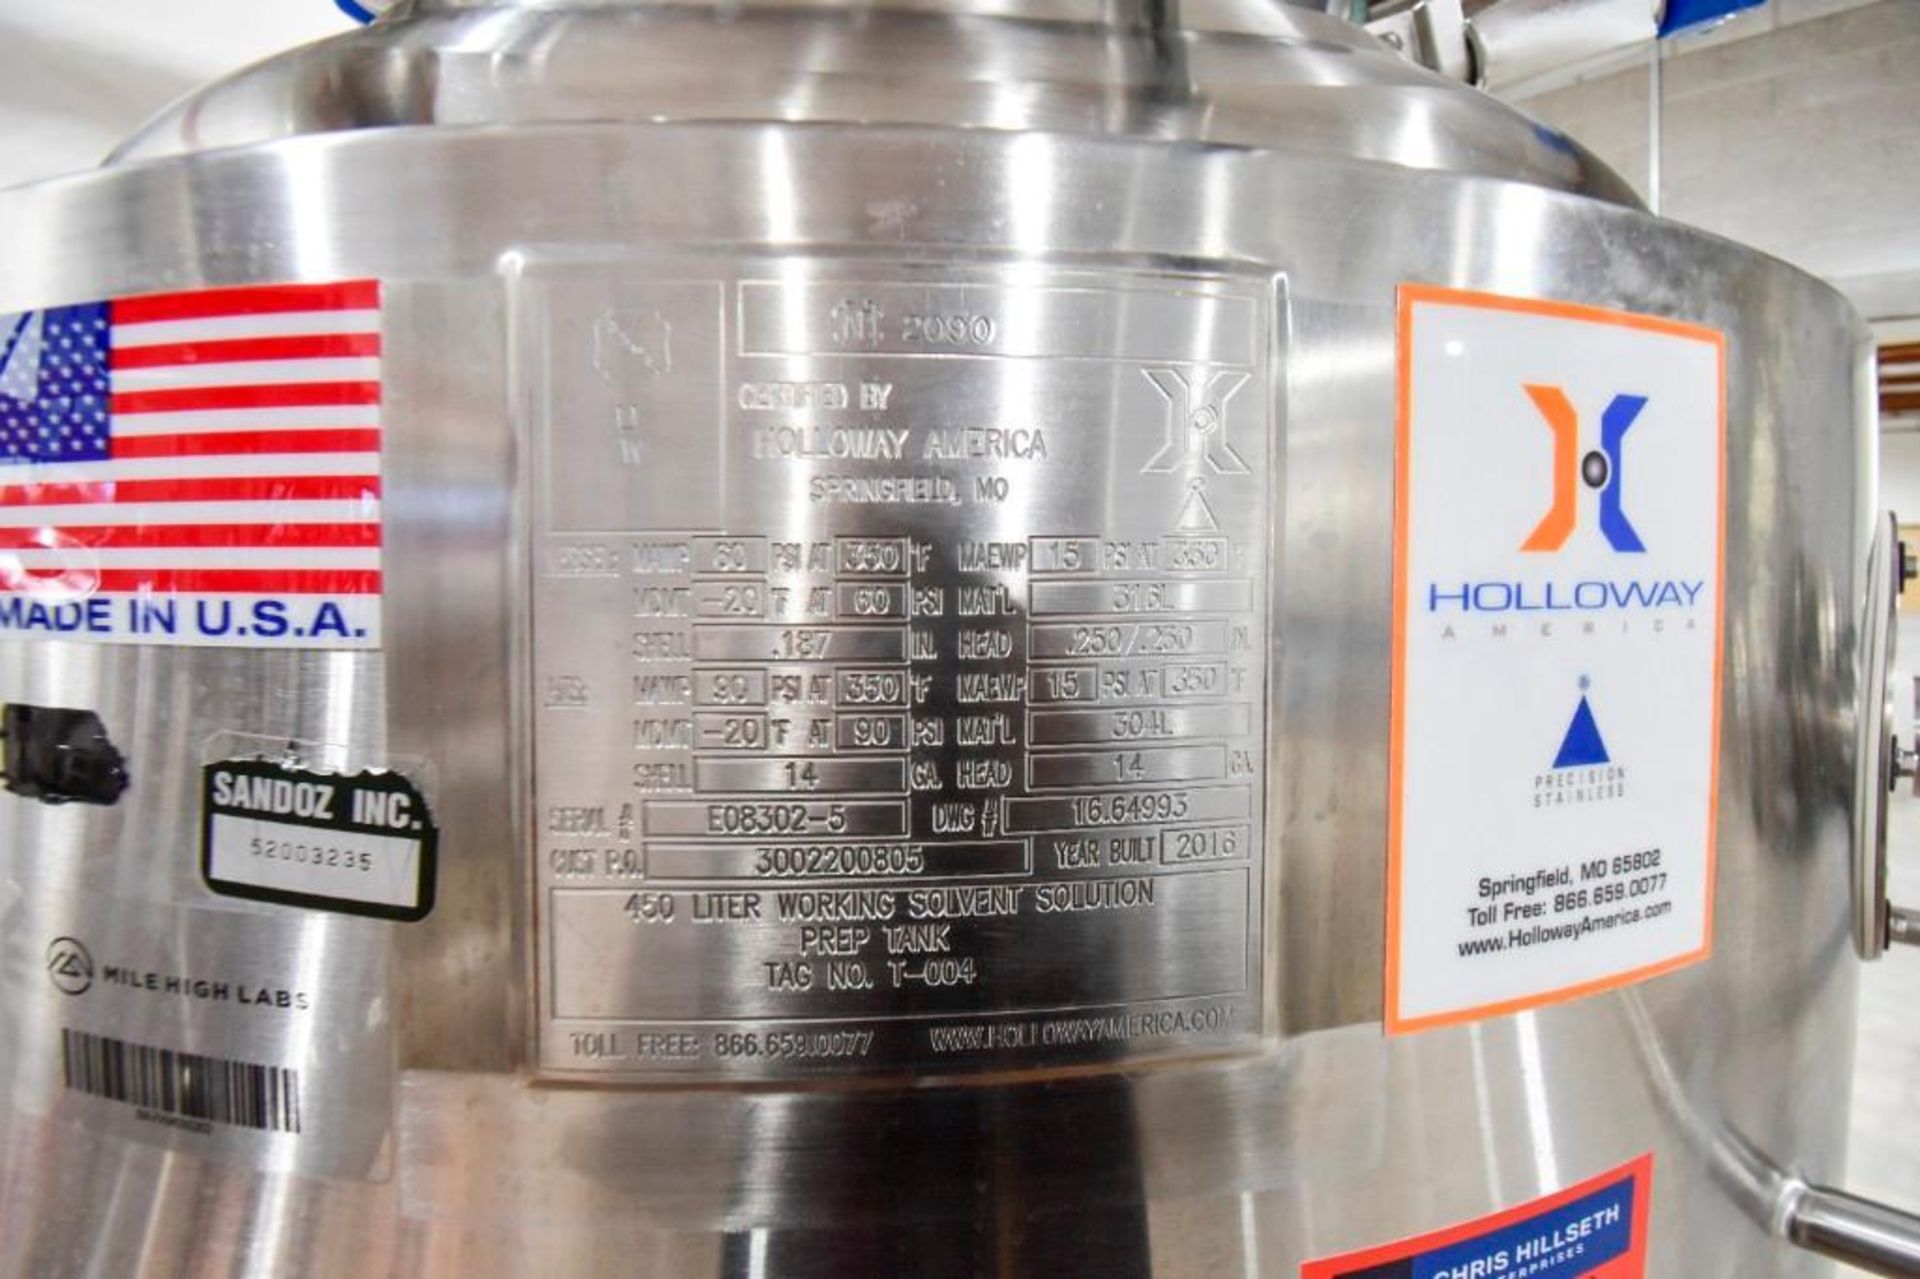 Holloway America Precision 450 L Stainless Steel Mixing Tank on Casters - Image 4 of 10